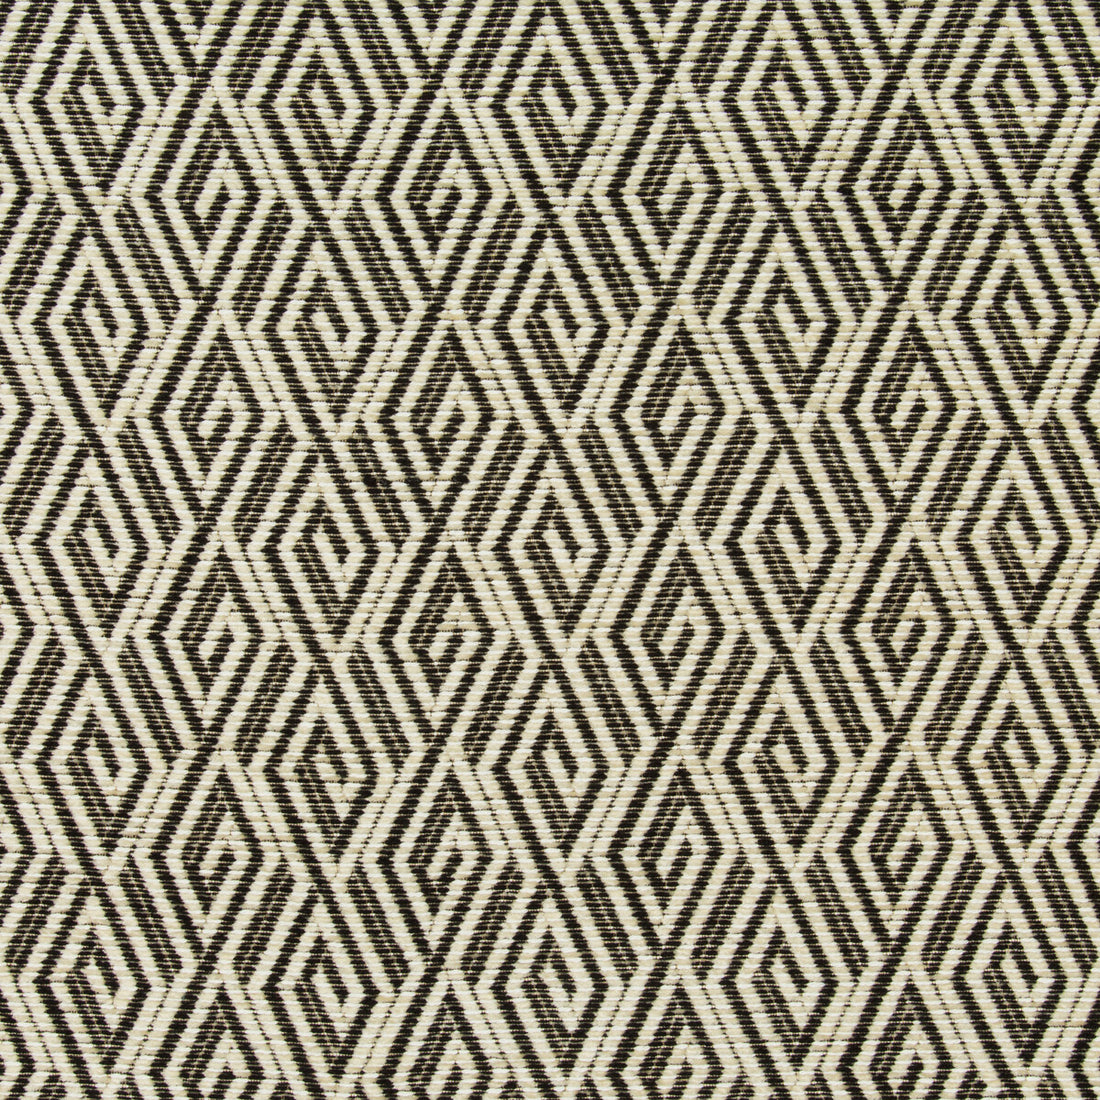 Kravet Contract fabric in 35044-8 color - pattern 35044.8.0 - by Kravet Contract in the Incase Crypton Gis collection